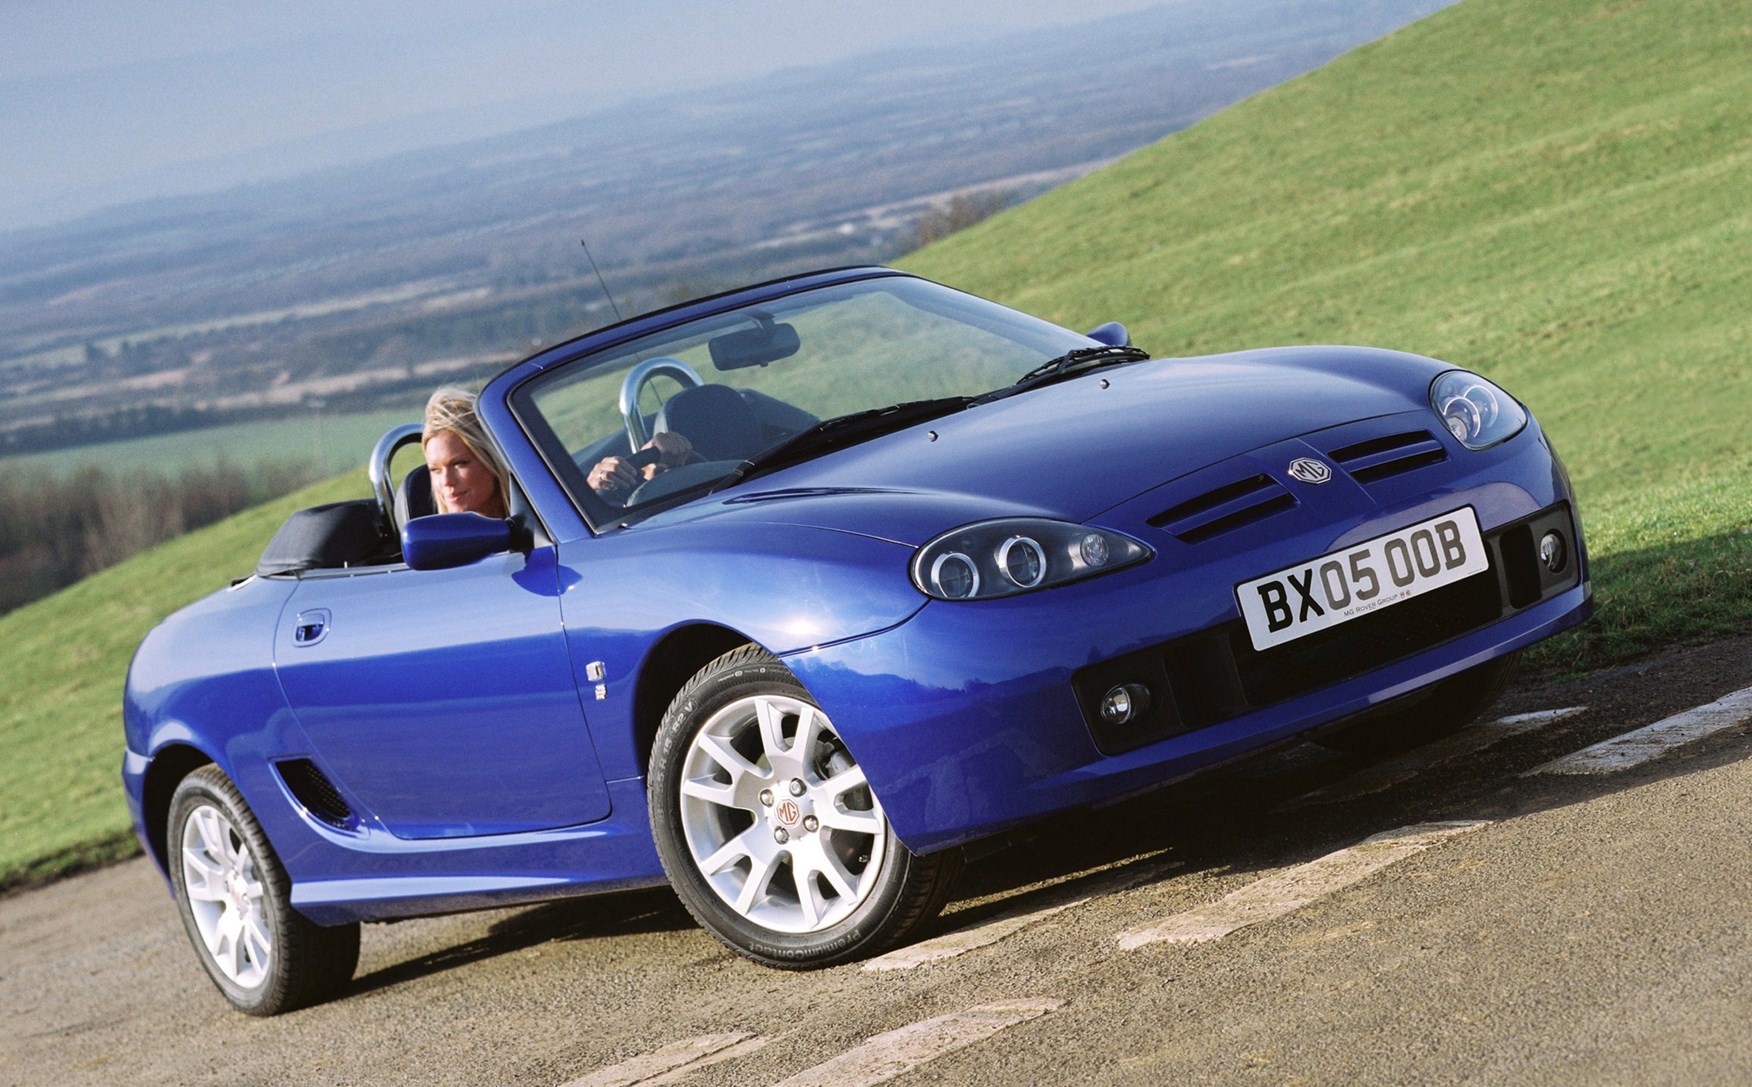 Used Mg Tf Convertible 02 05 Review Parkers